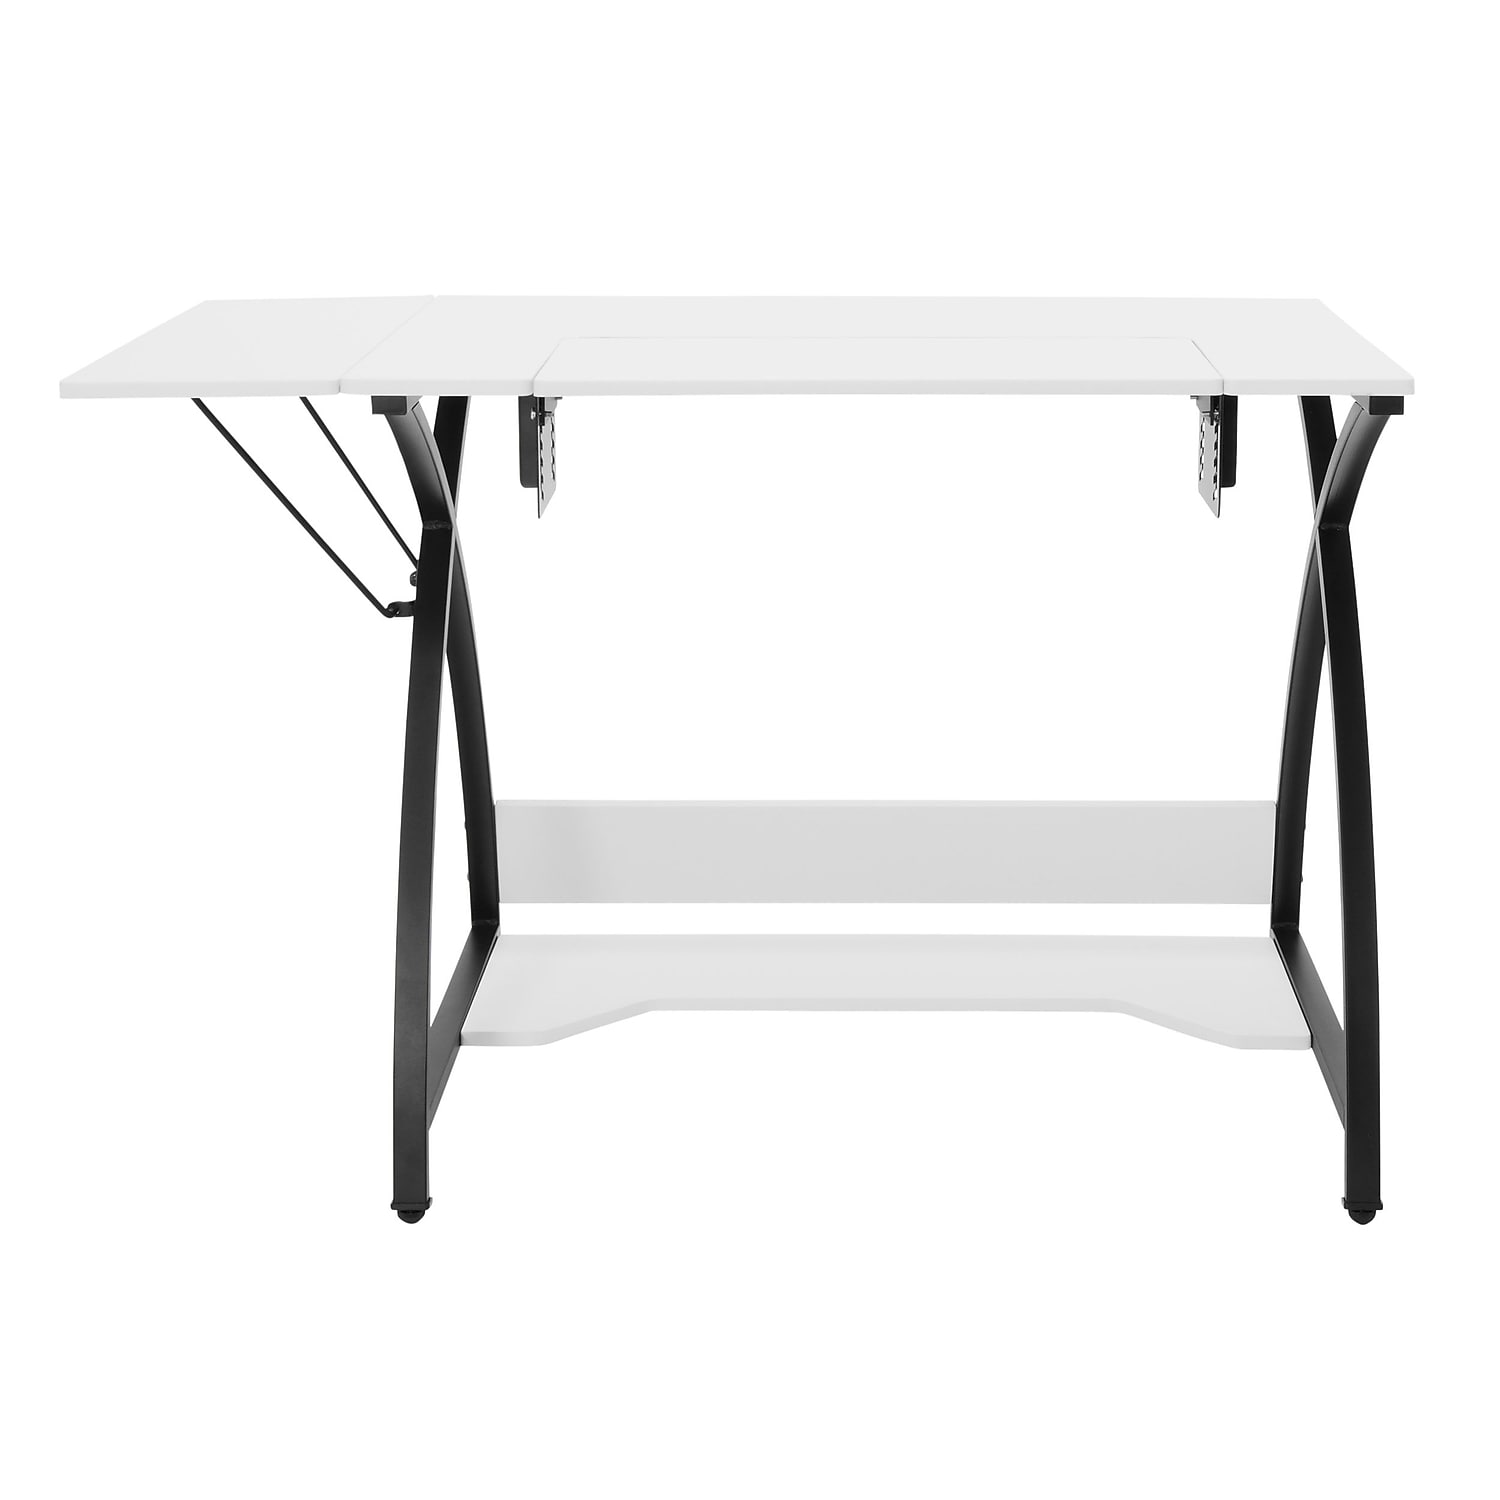 Sew Ready 13332 Comet Modern Sewing Table in Black / White - image 5 of 7